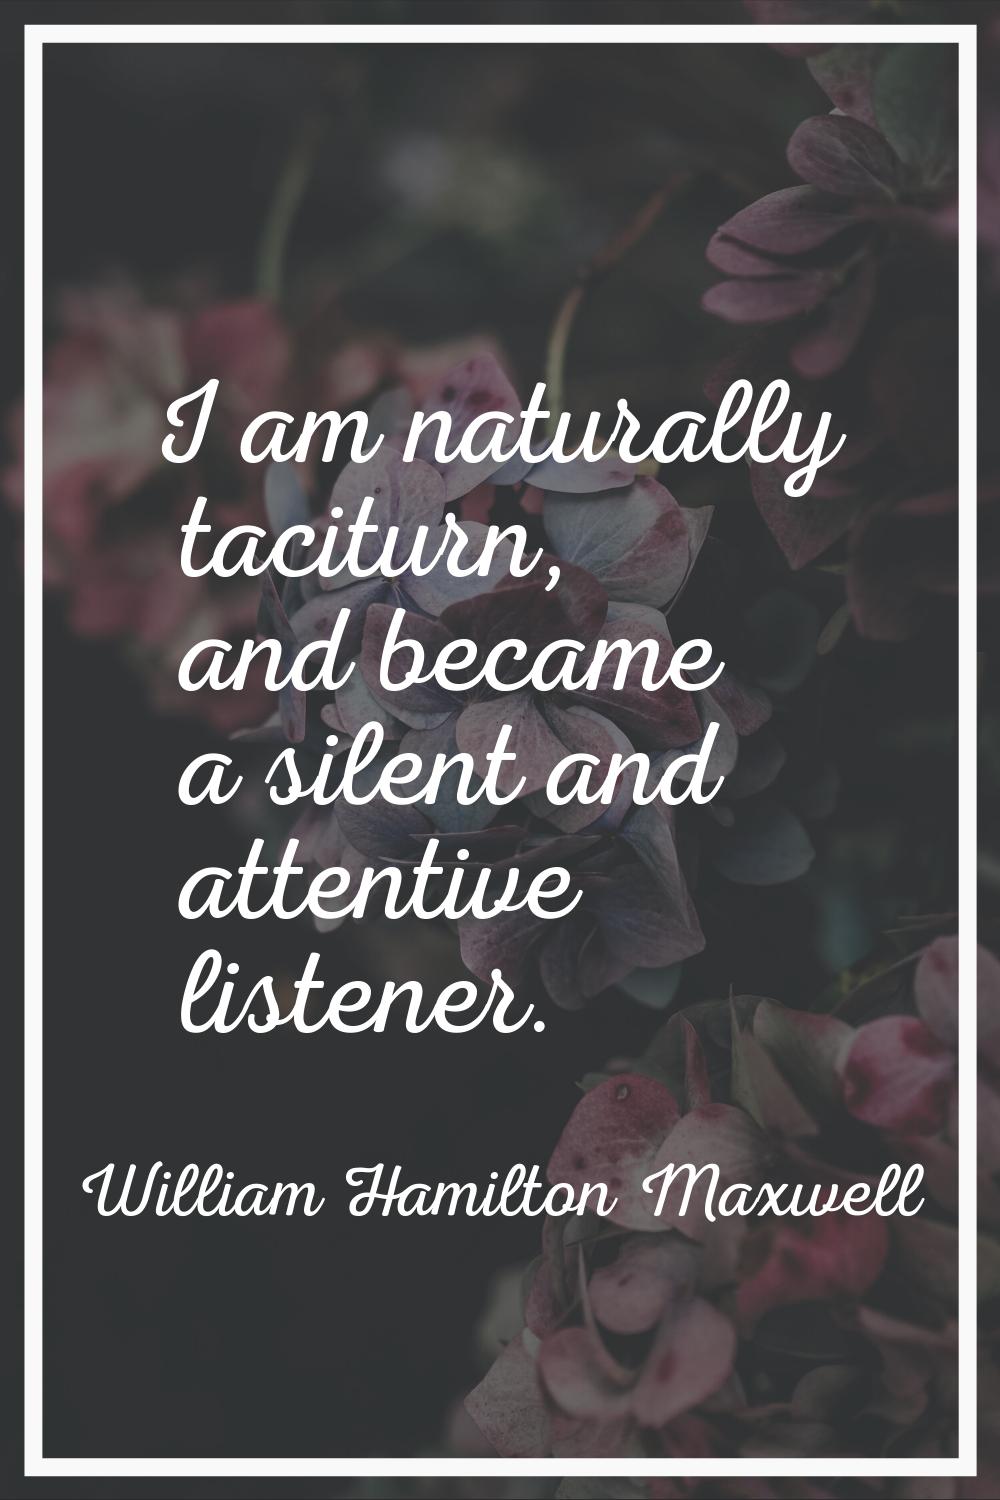 I am naturally taciturn, and became a silent and attentive listener.